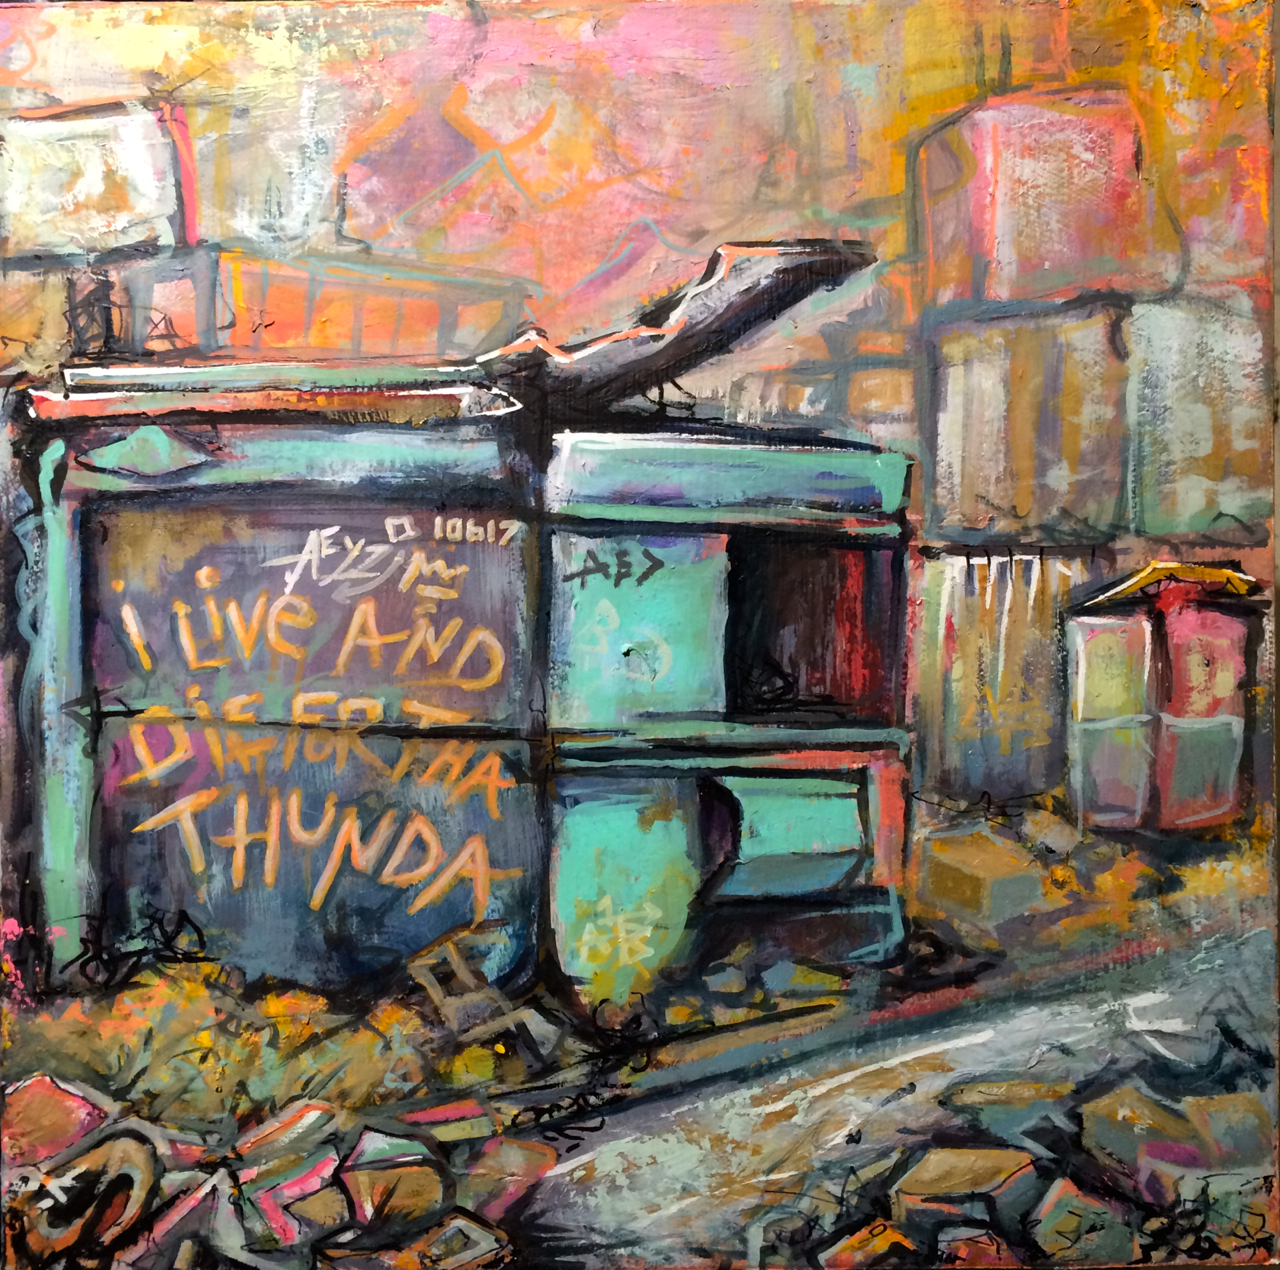 %22Live and Die for the Thunda%22. 2014. Oil on Panel. 14%22x14%22.jpg